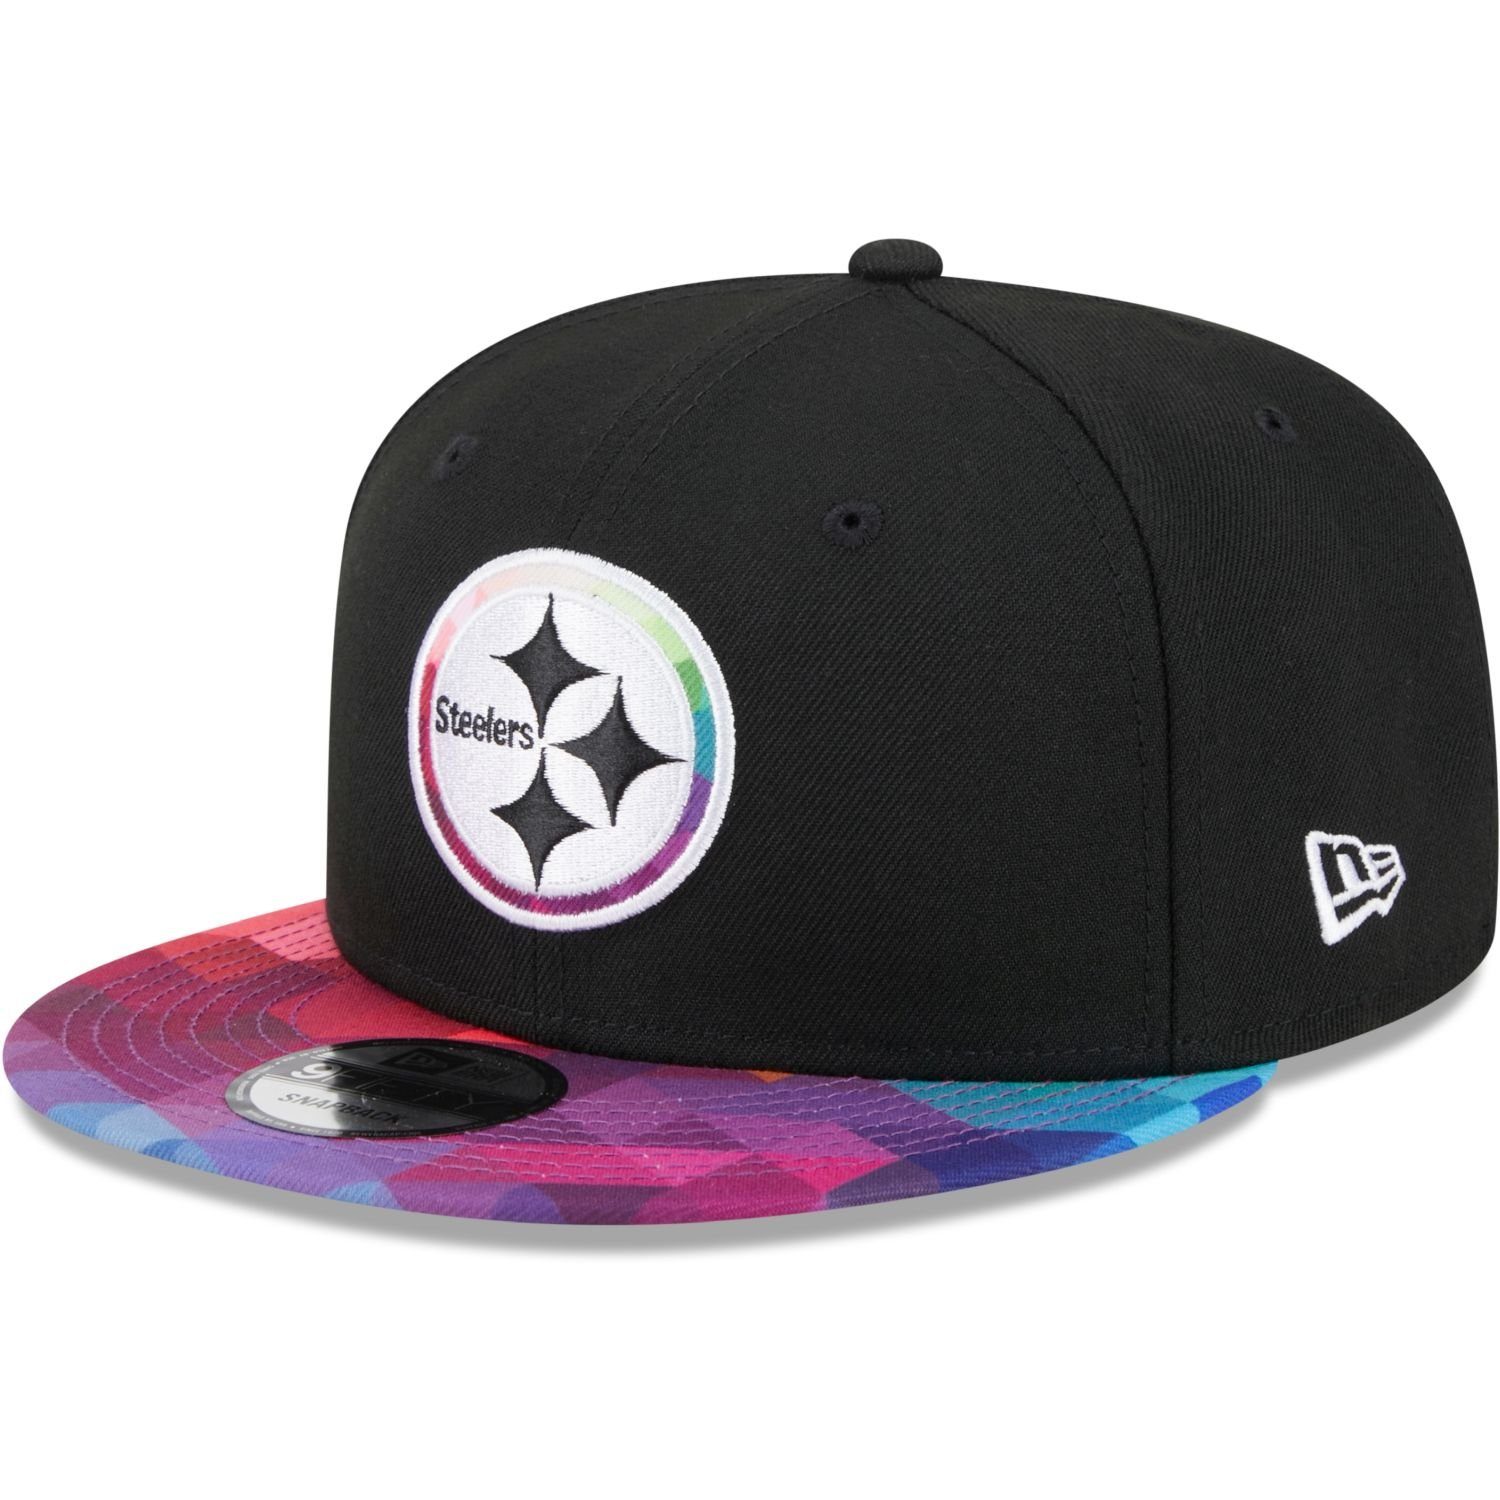 New Era Snapback Cap 9FIFTY CRUCIAL CATCH NFL Teams Pittsburgh Steelers